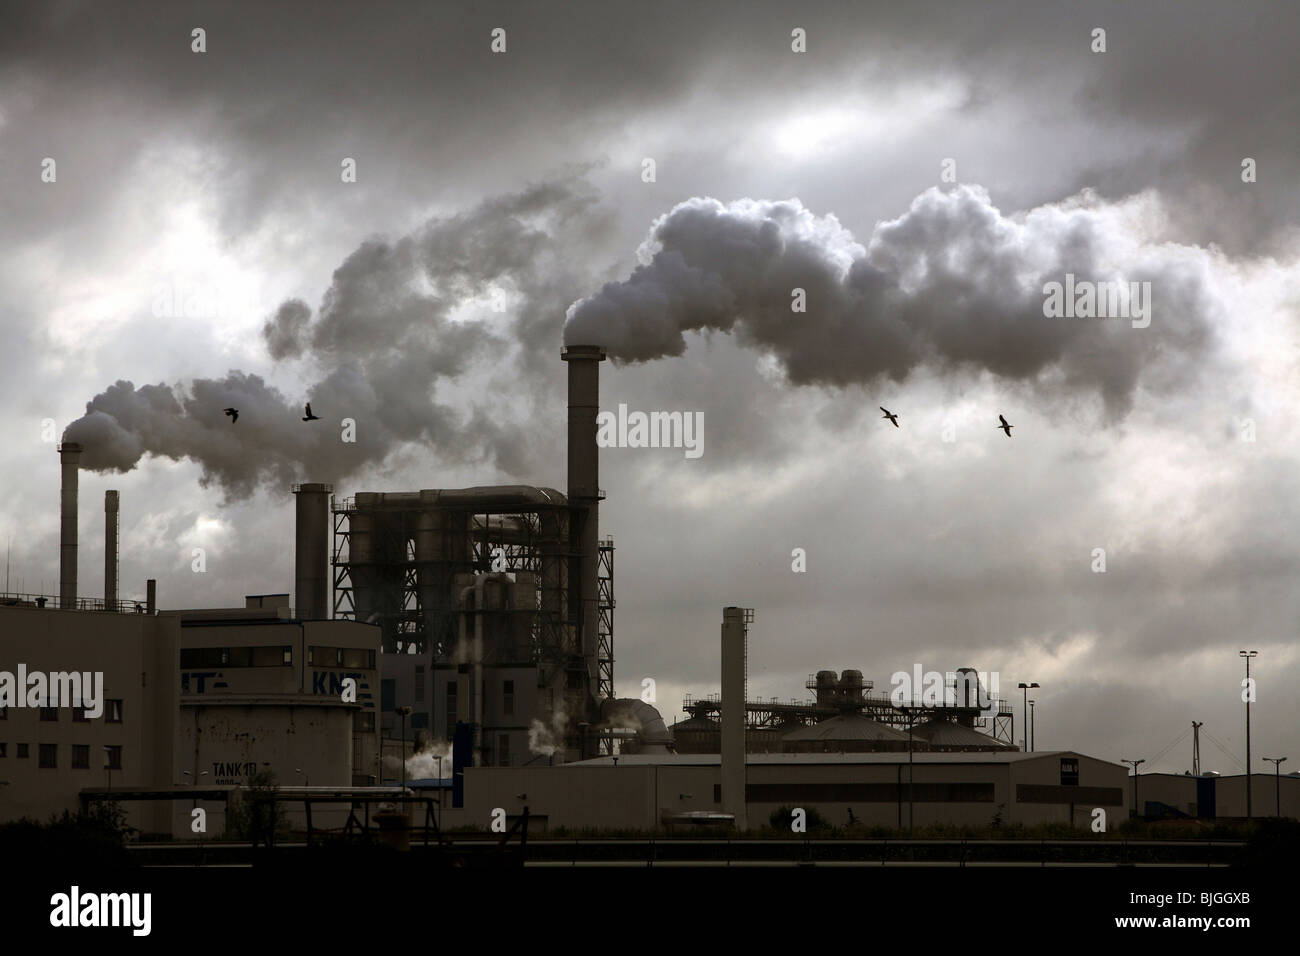 Fuming chimneys at the industrial facilities of Klausner Nordic Timber, Wismar, Germany Stock Photo